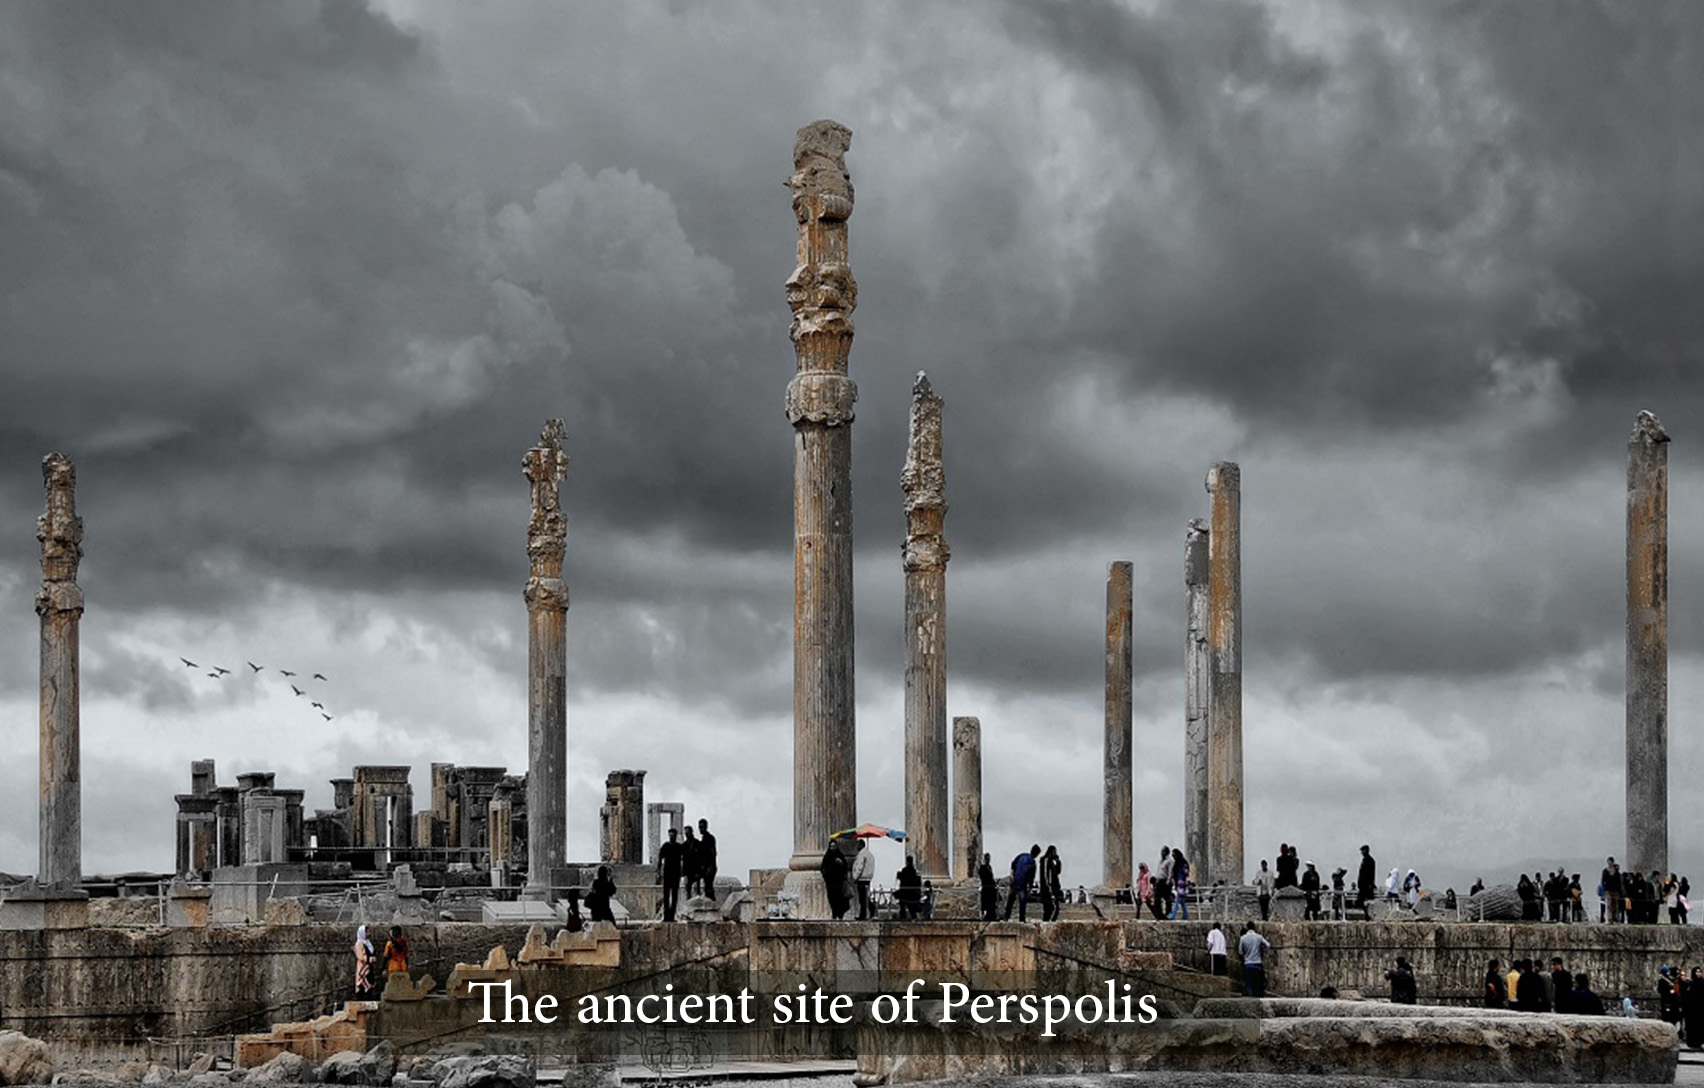 travel to Iran for: The ancient site of Perspolis